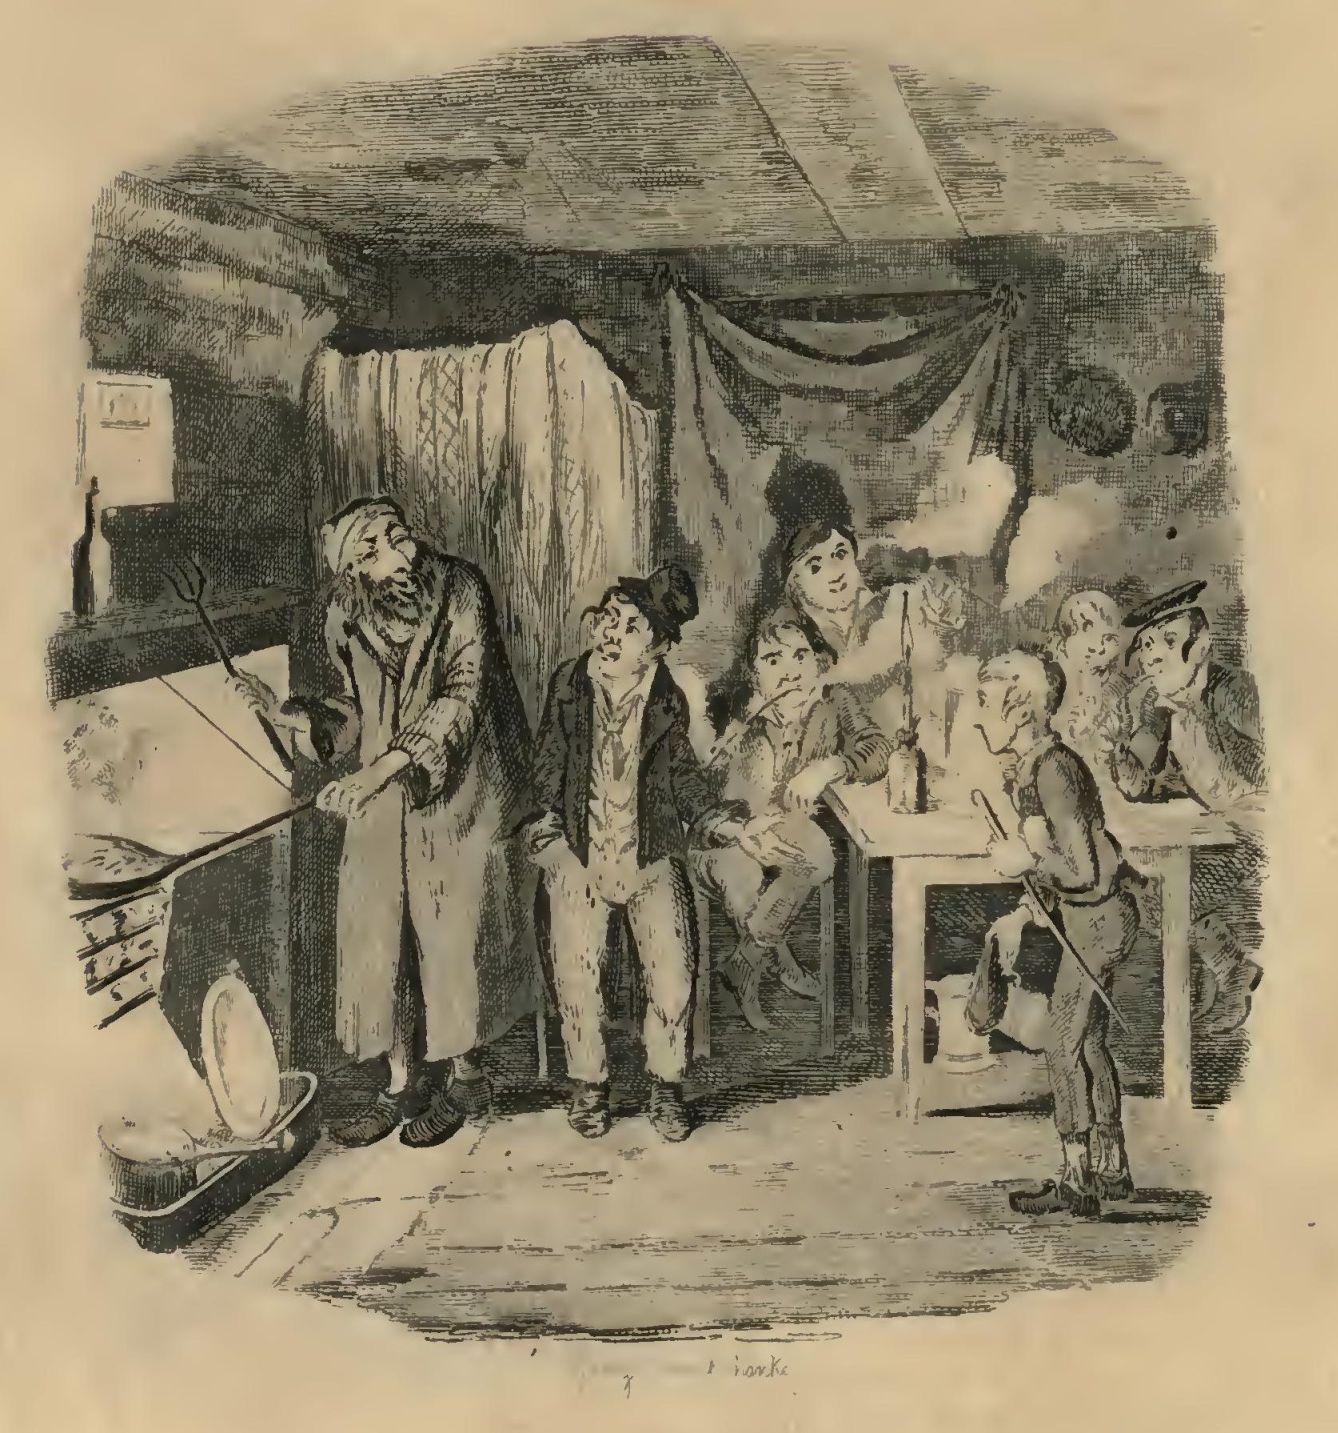 Oliver Twist, by Charles Dickens picture